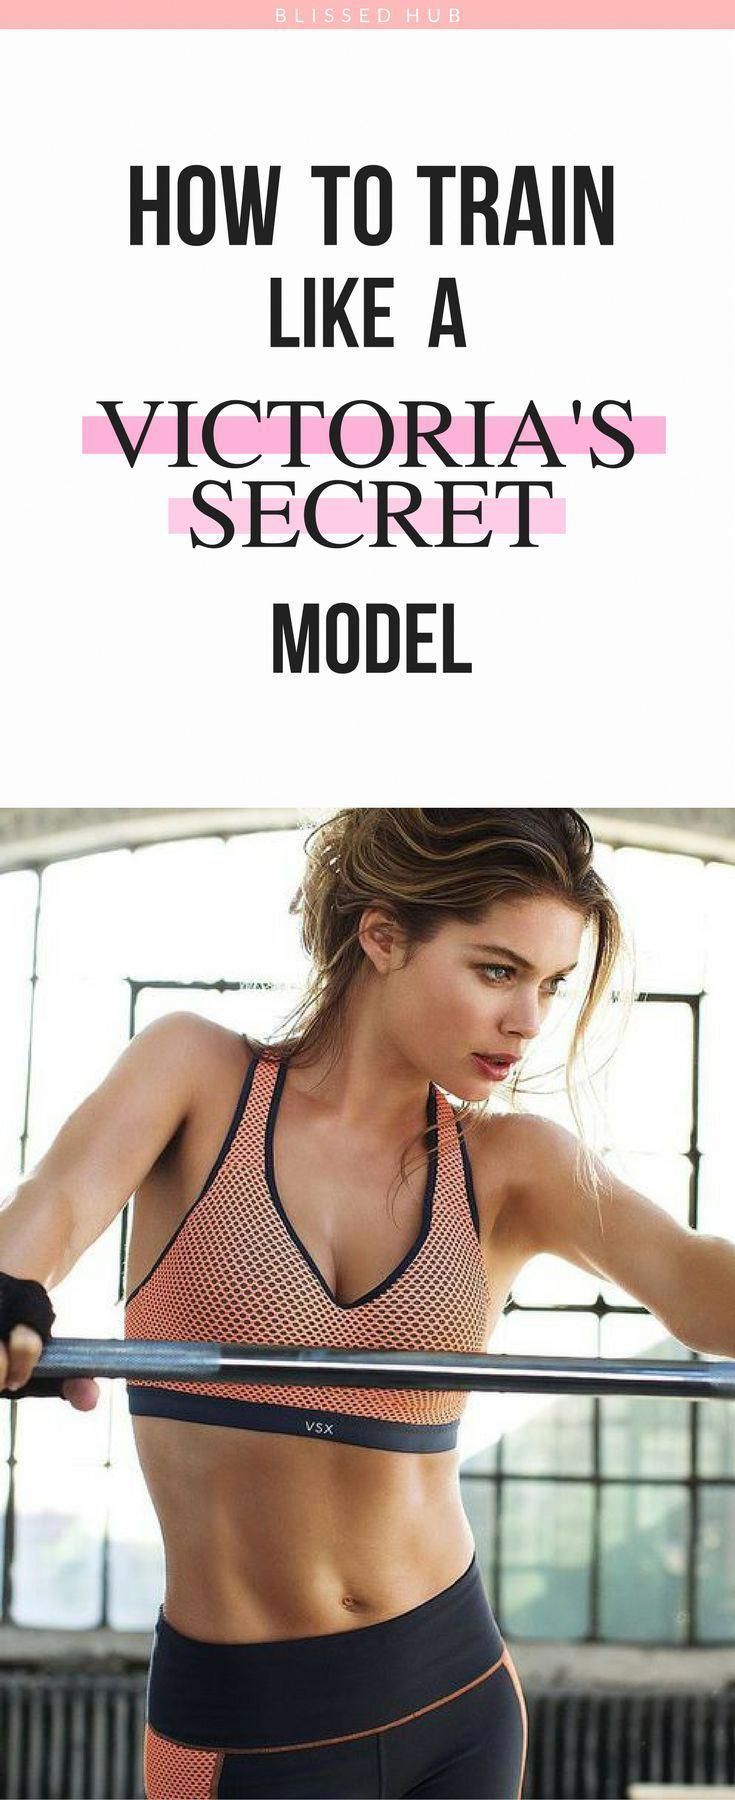 How to train like a Victoria's Secret Angel! Workouts from head to toe! - Blissed Hub - How to train like a Victoria's Secret Angel! Workouts from head to toe! - Blissed Hub -   14 physically fitness Men ideas